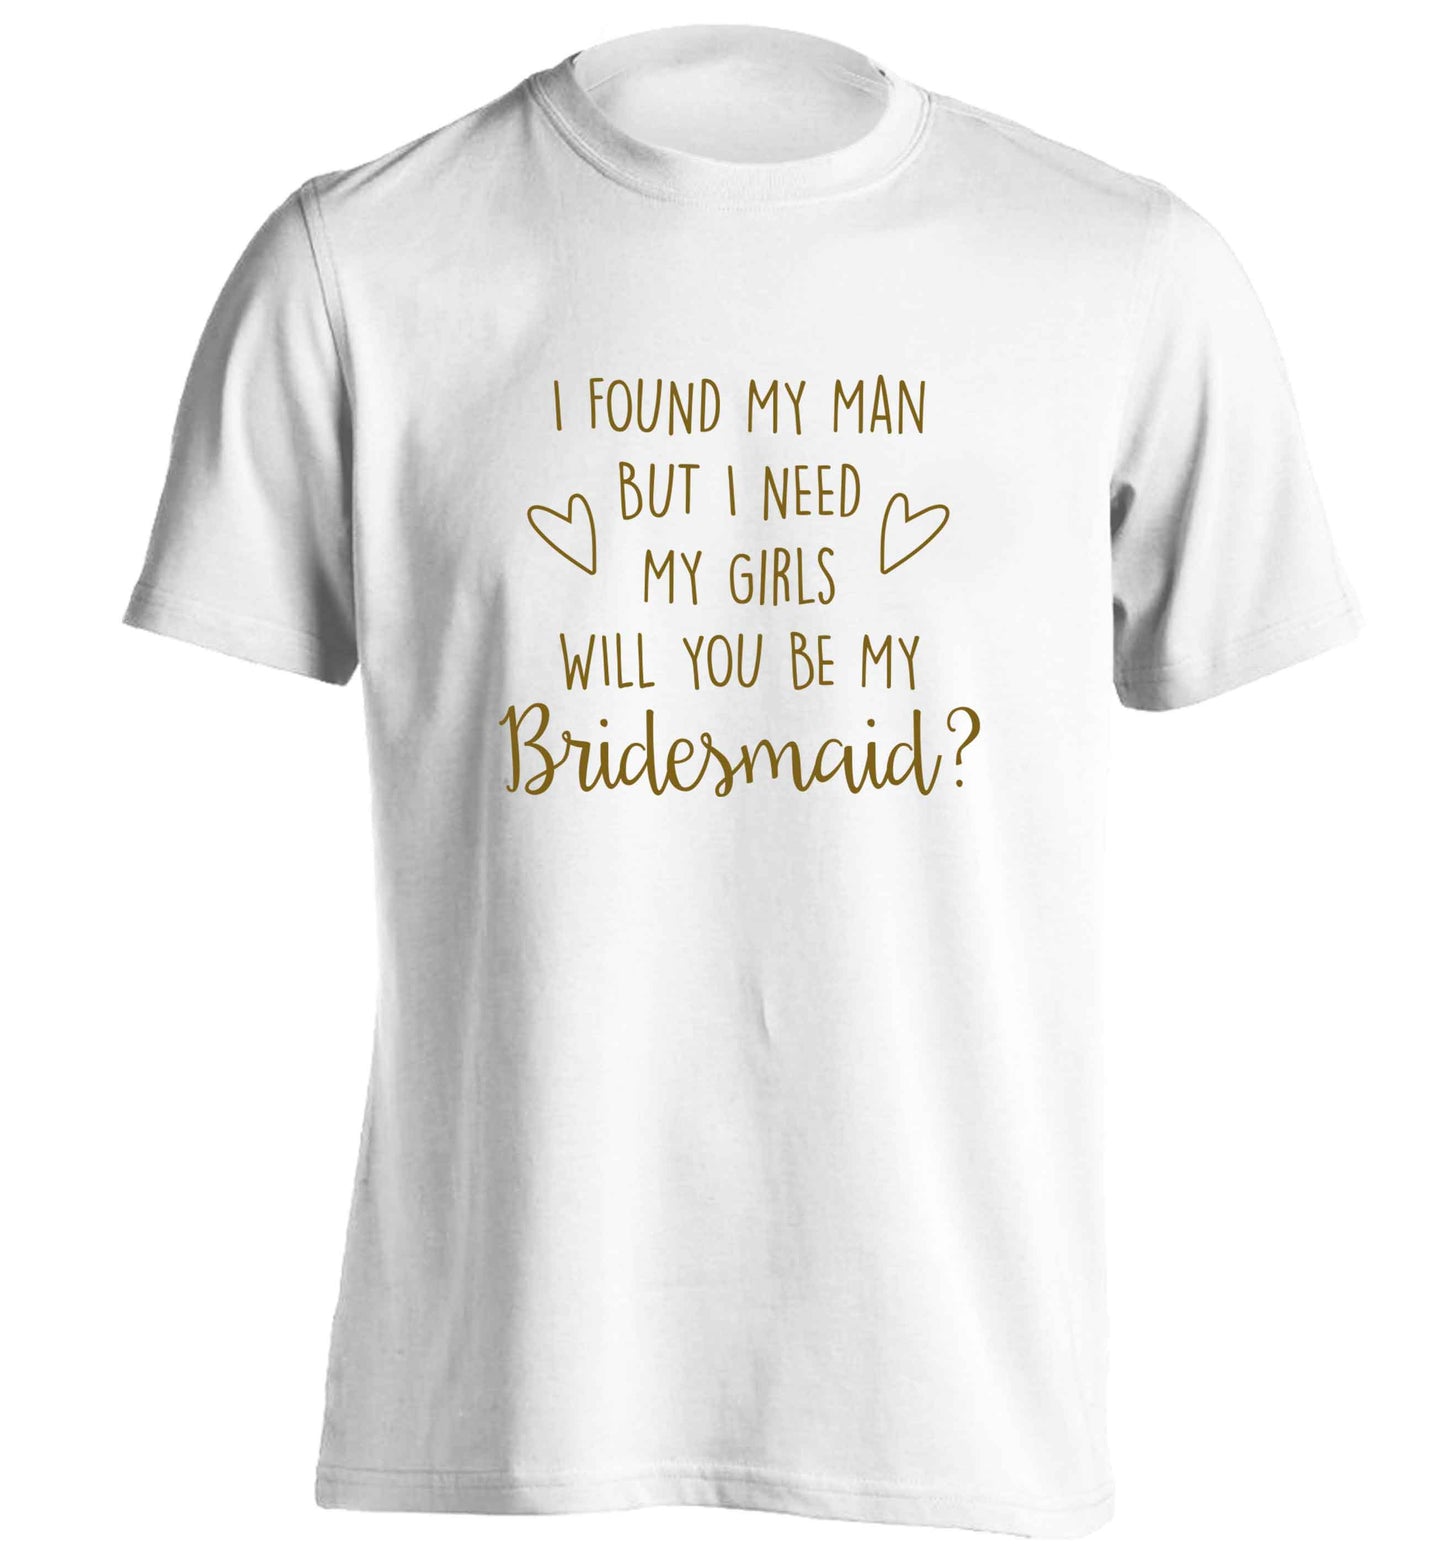 I found my man but I need my girls will you be my bridesmaid? adults unisex white Tshirt 2XL